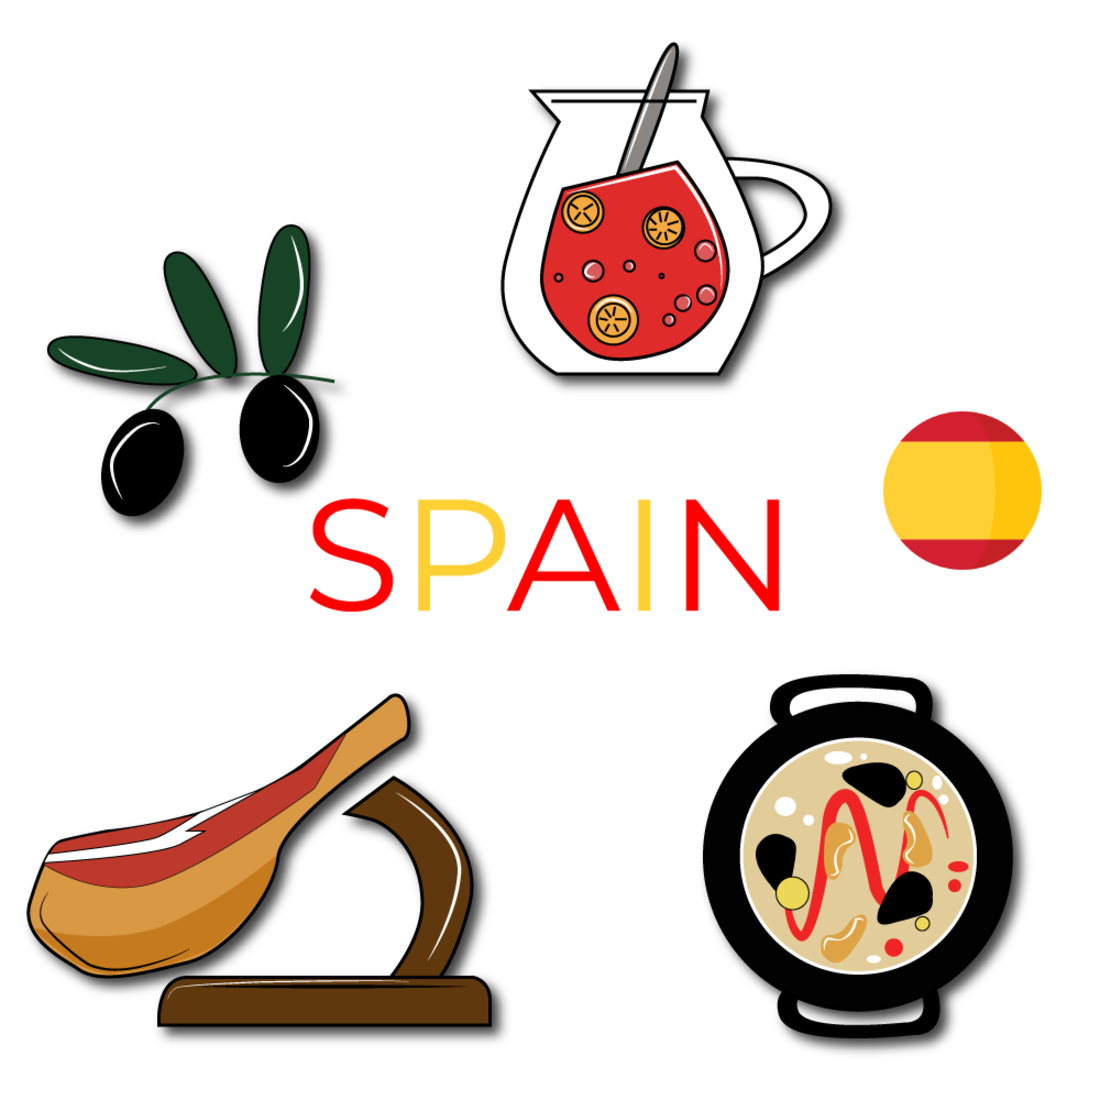 Spain and Spanish objects preview image.